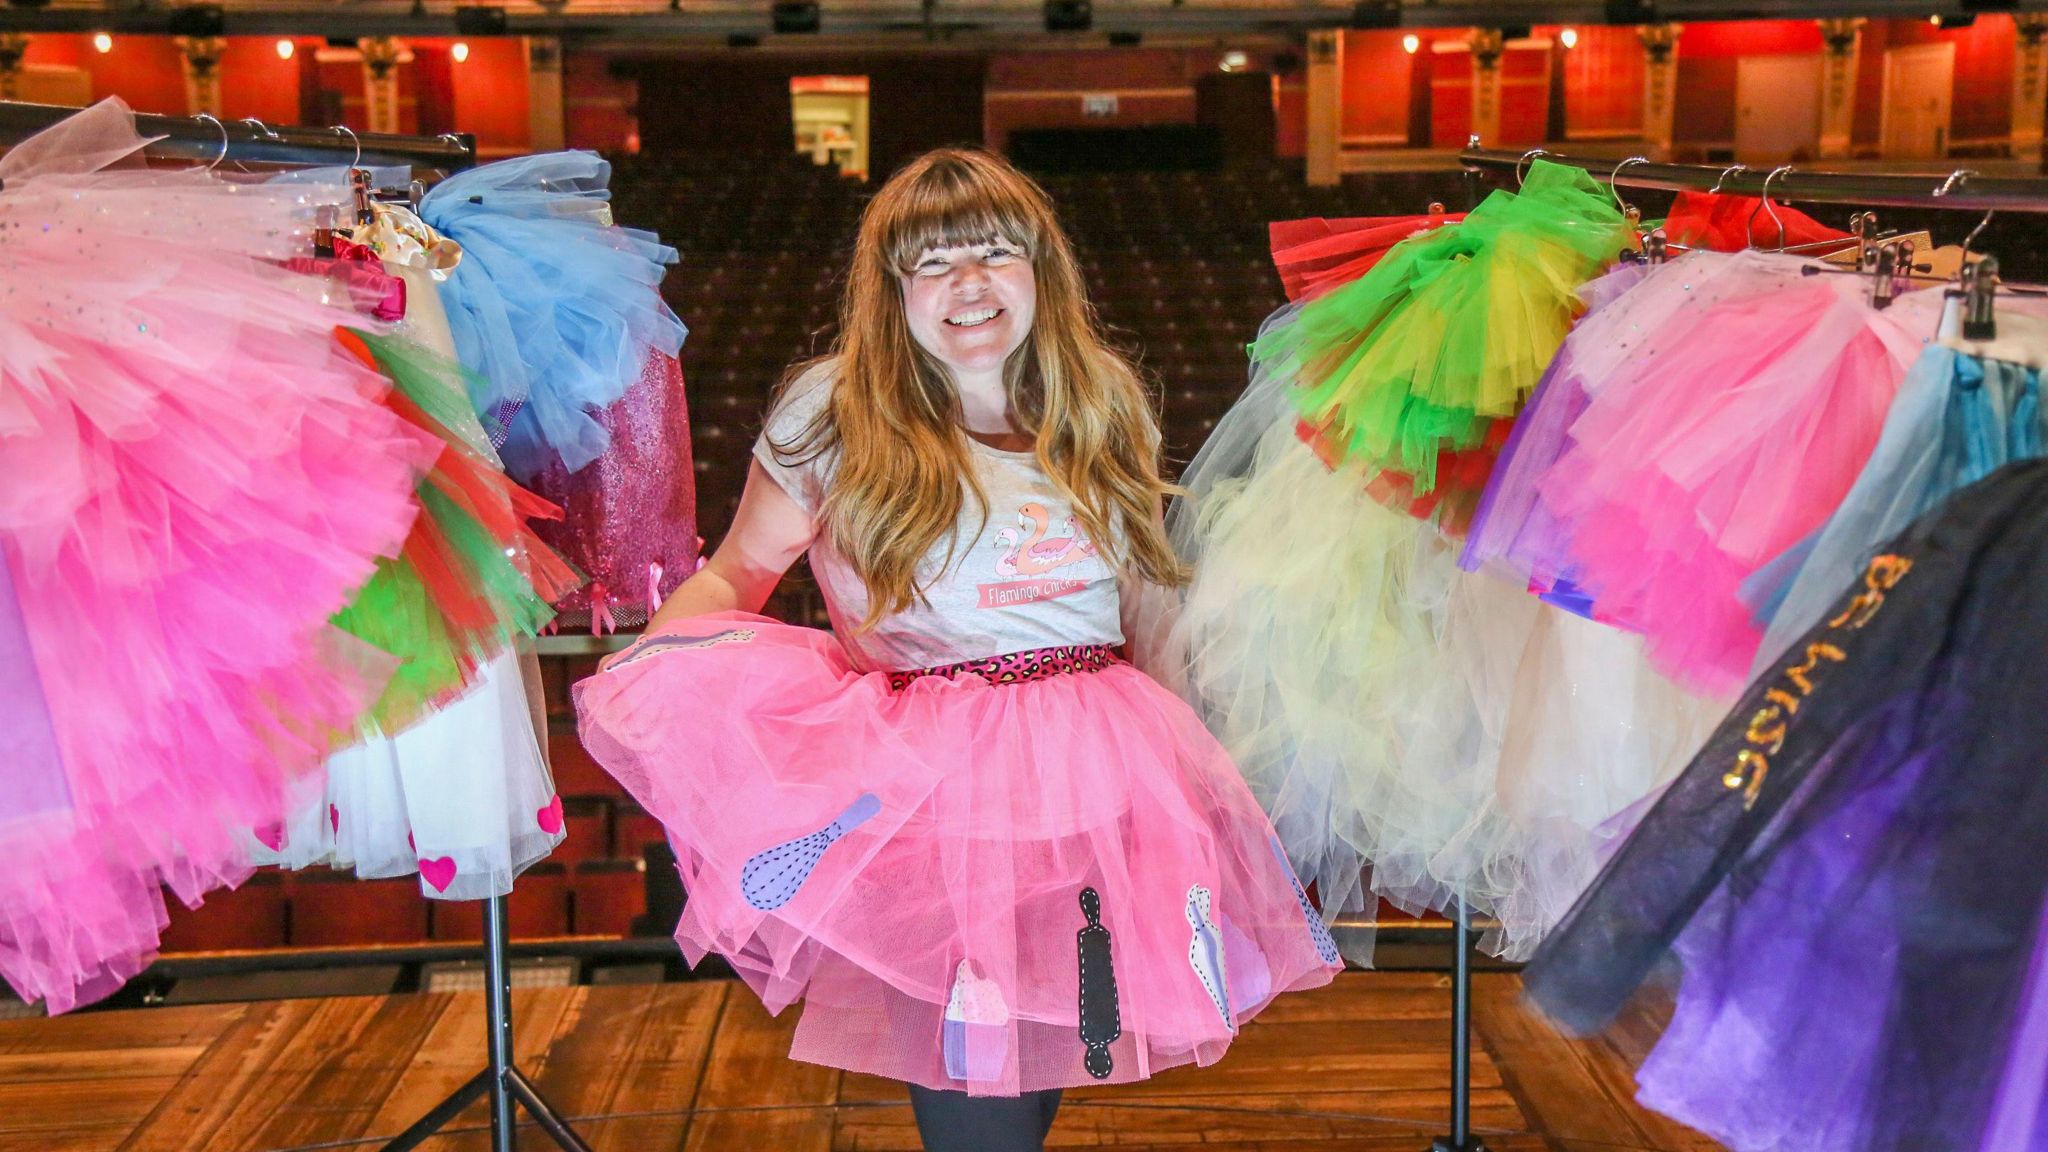 Briony May Williams wearing a tutu on stage at the Bristol Hippodrome, surrounded by clothing rails of other tutus